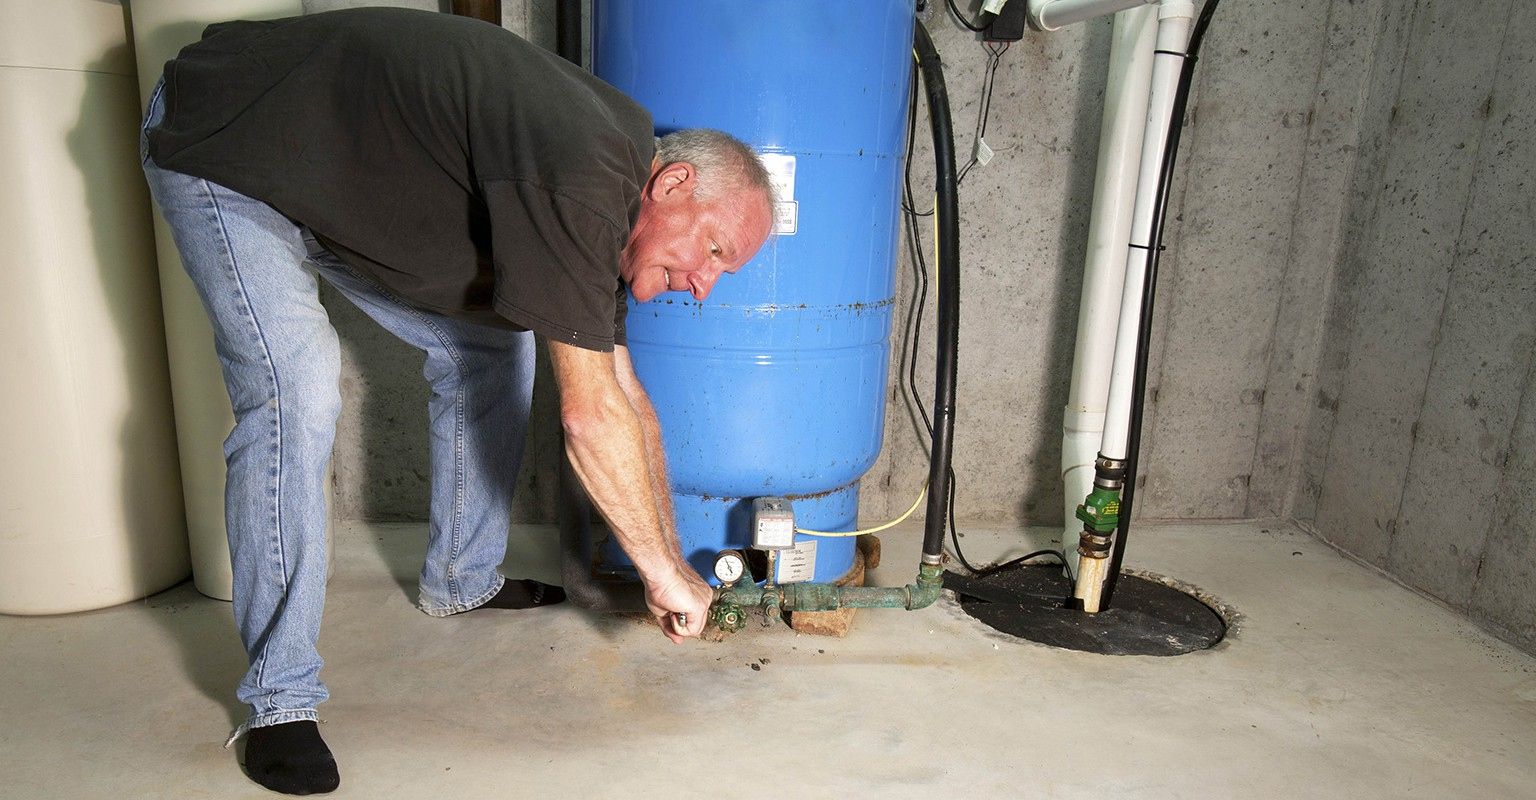 The 10 Best Pump Repair Services Near Me (with Free Estimates)